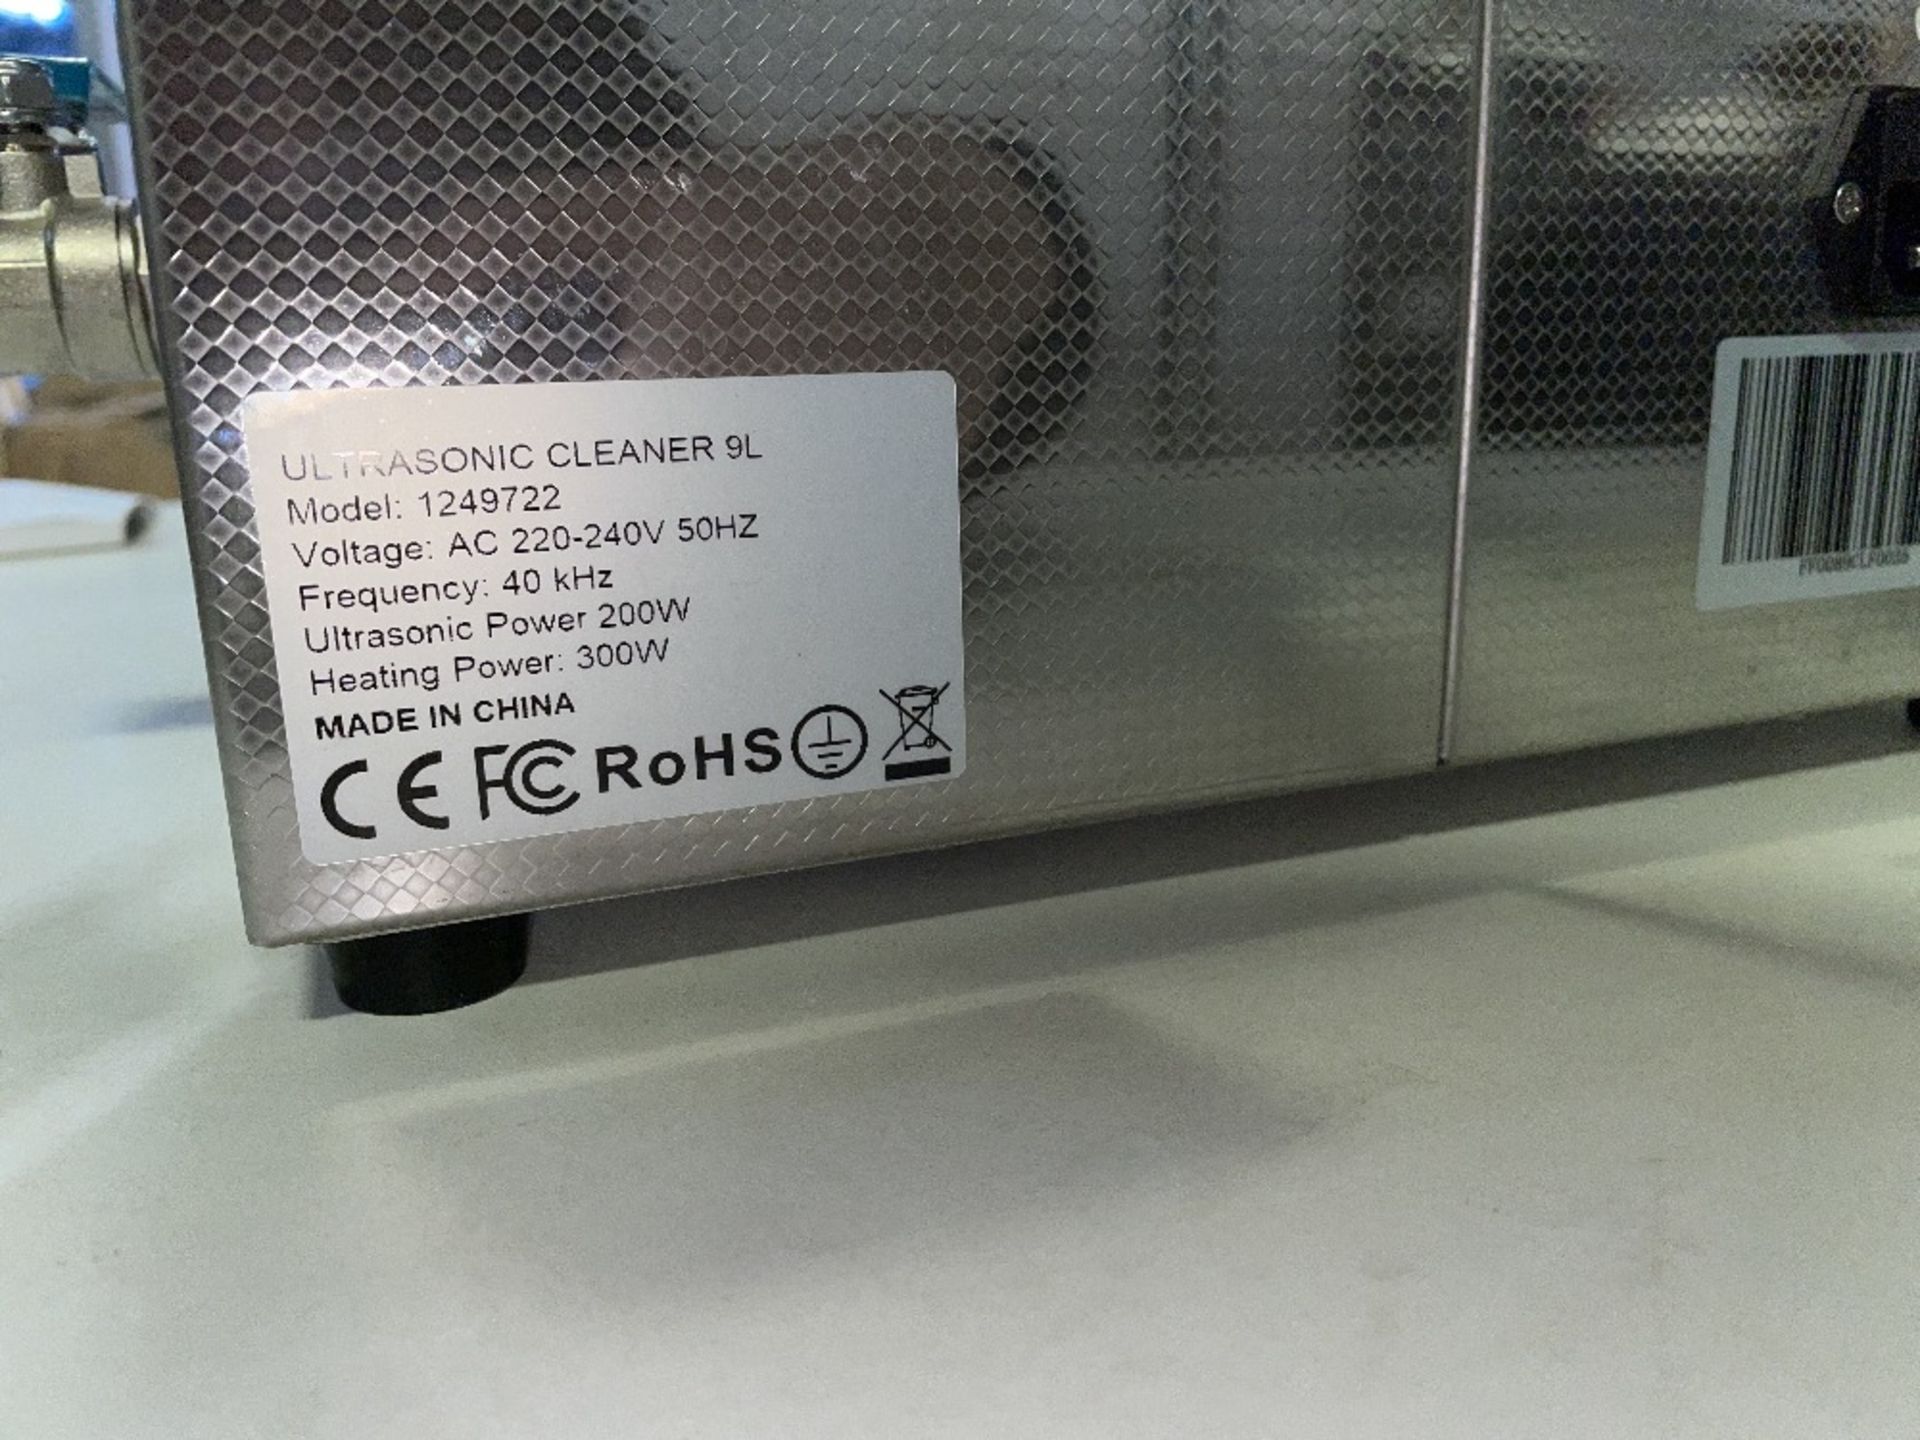 RS Pro 1249722 9L Ultrasonic Cleaner - Image 5 of 5